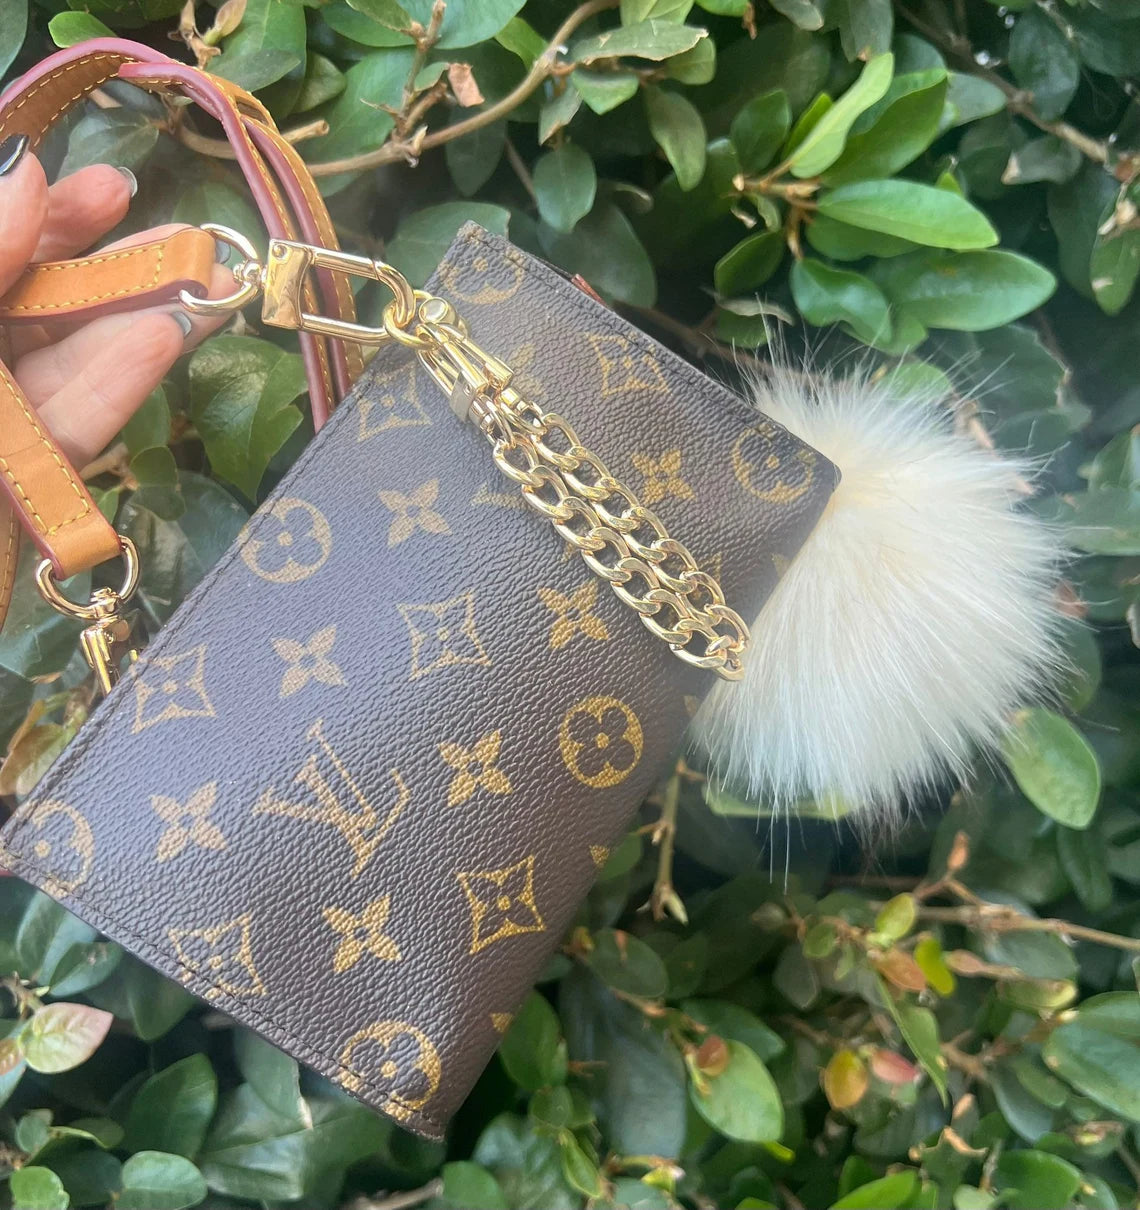 AUTHENTIC LOUIS VUITTON TOILETRY 19 + Complimentary Accessories